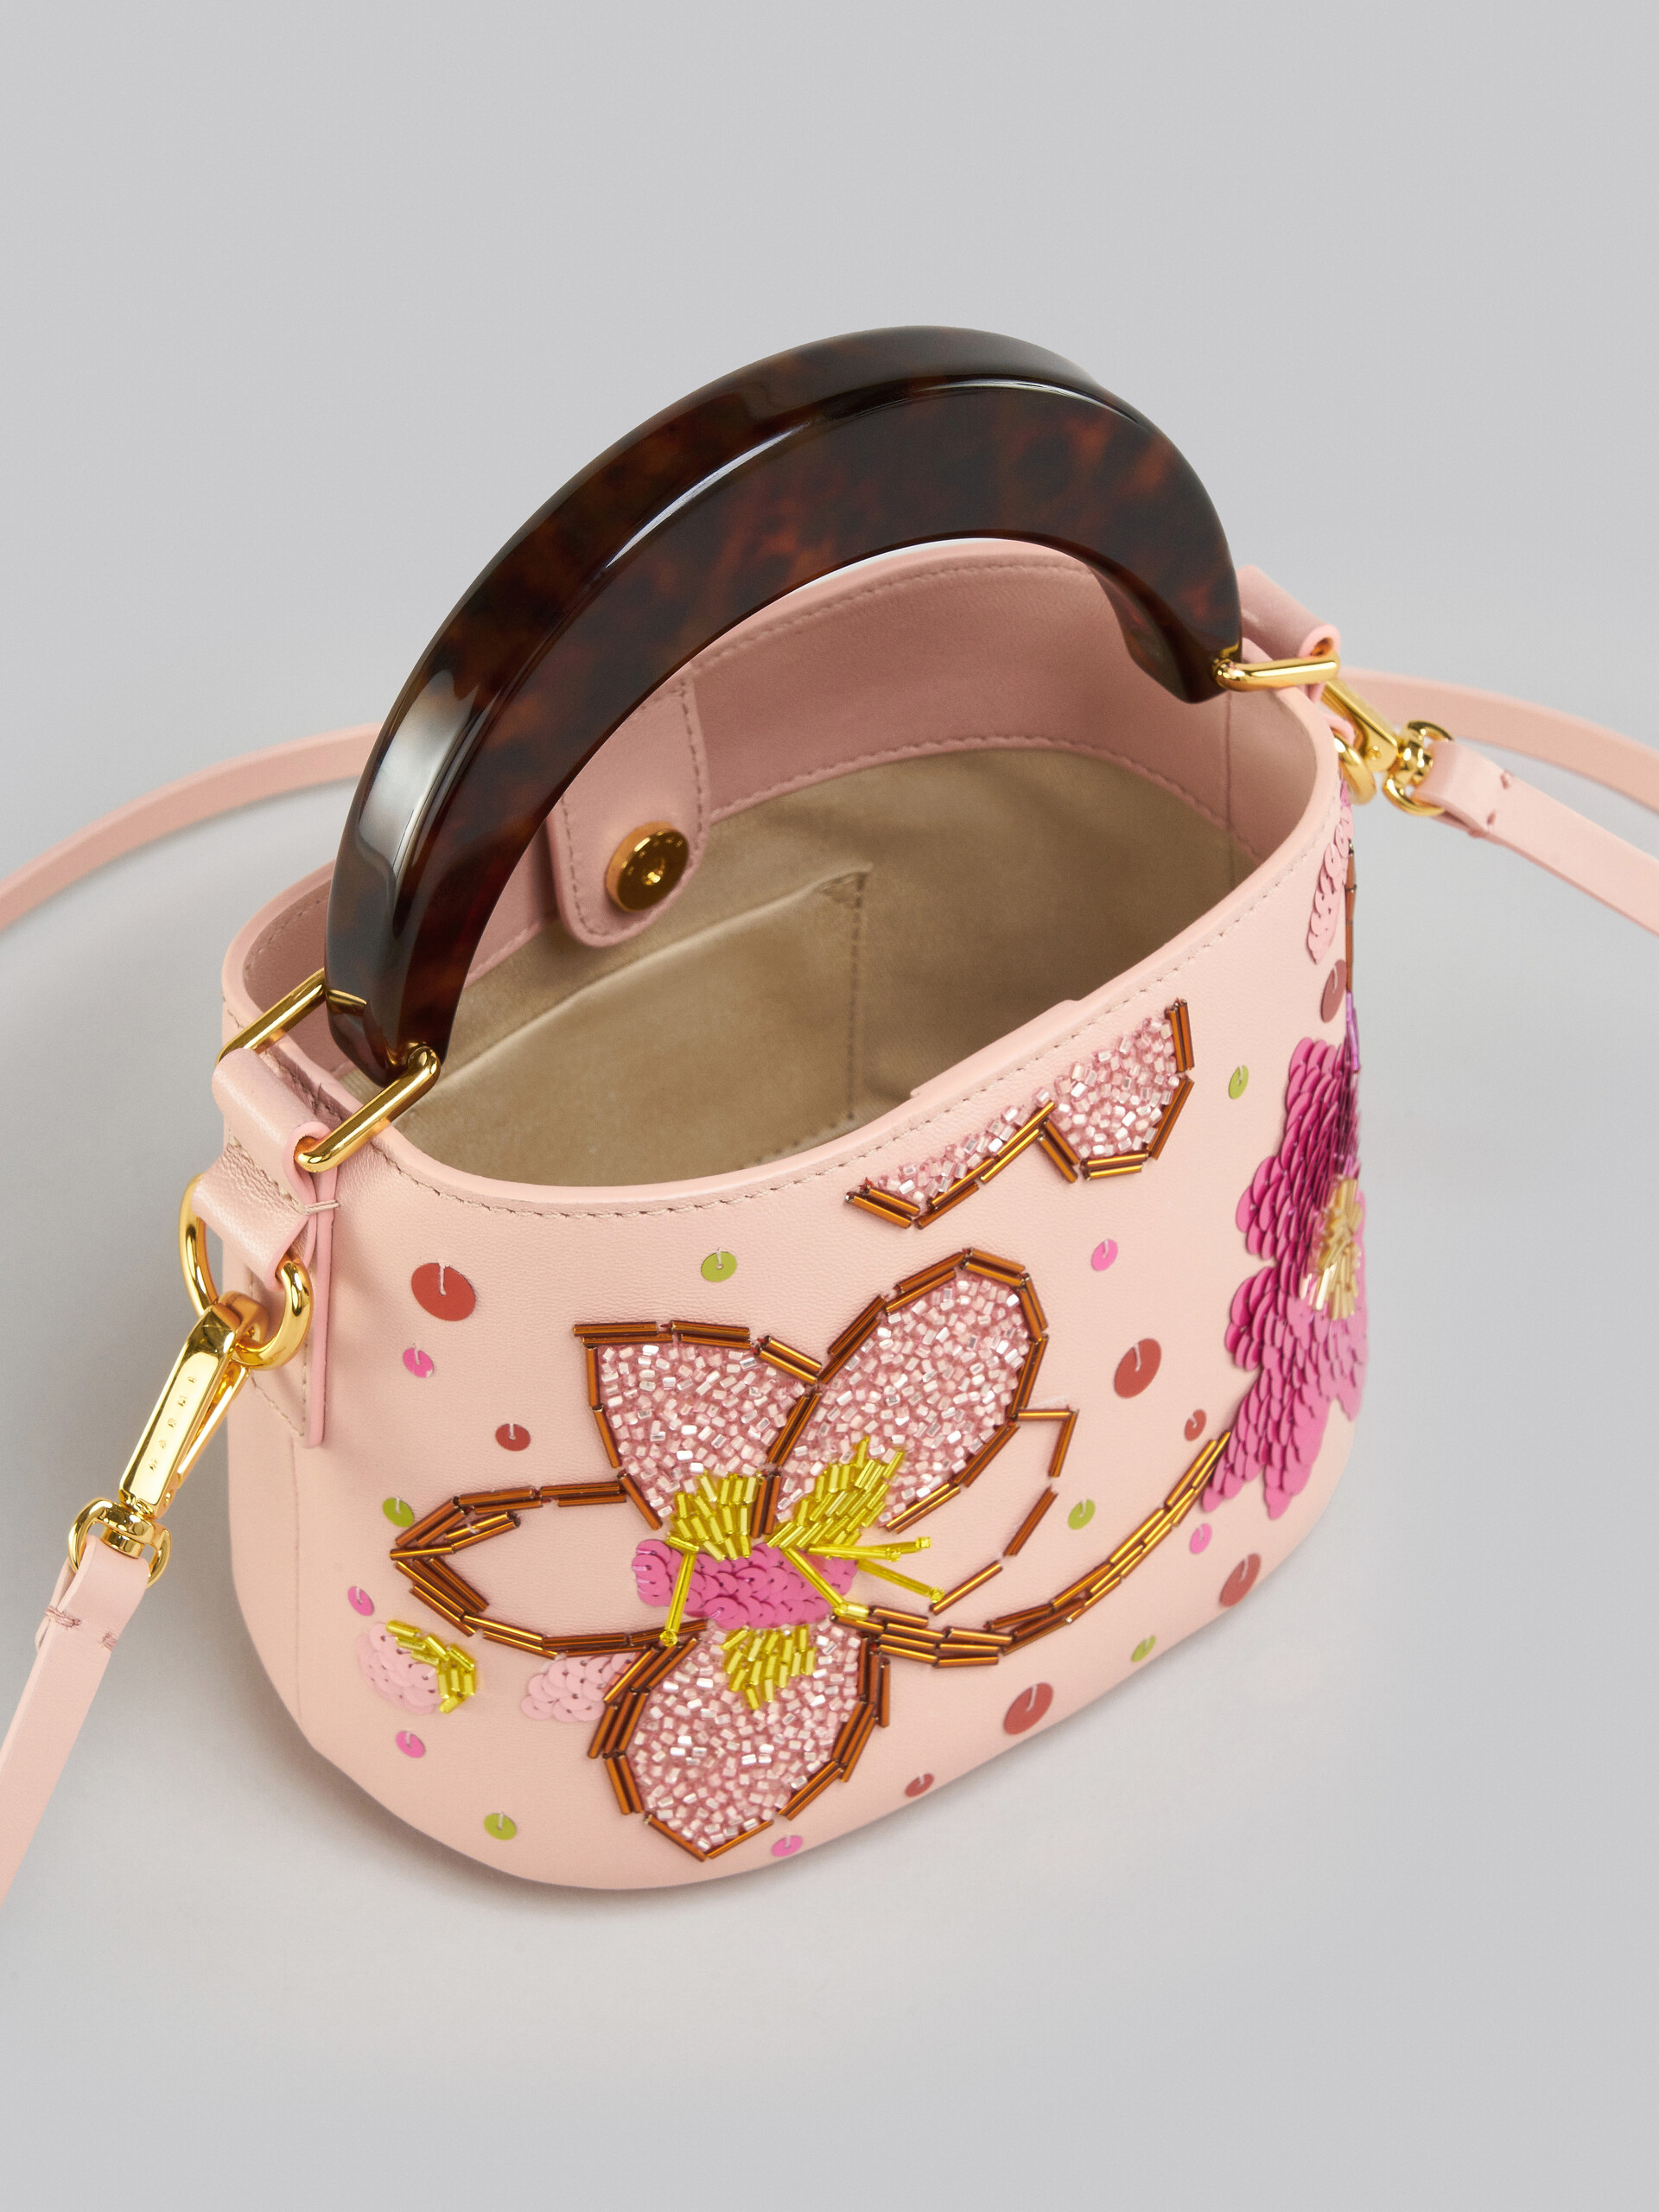 Venice Mini Bucket in embroidered pink leather - Shoulder Bag - Image 3